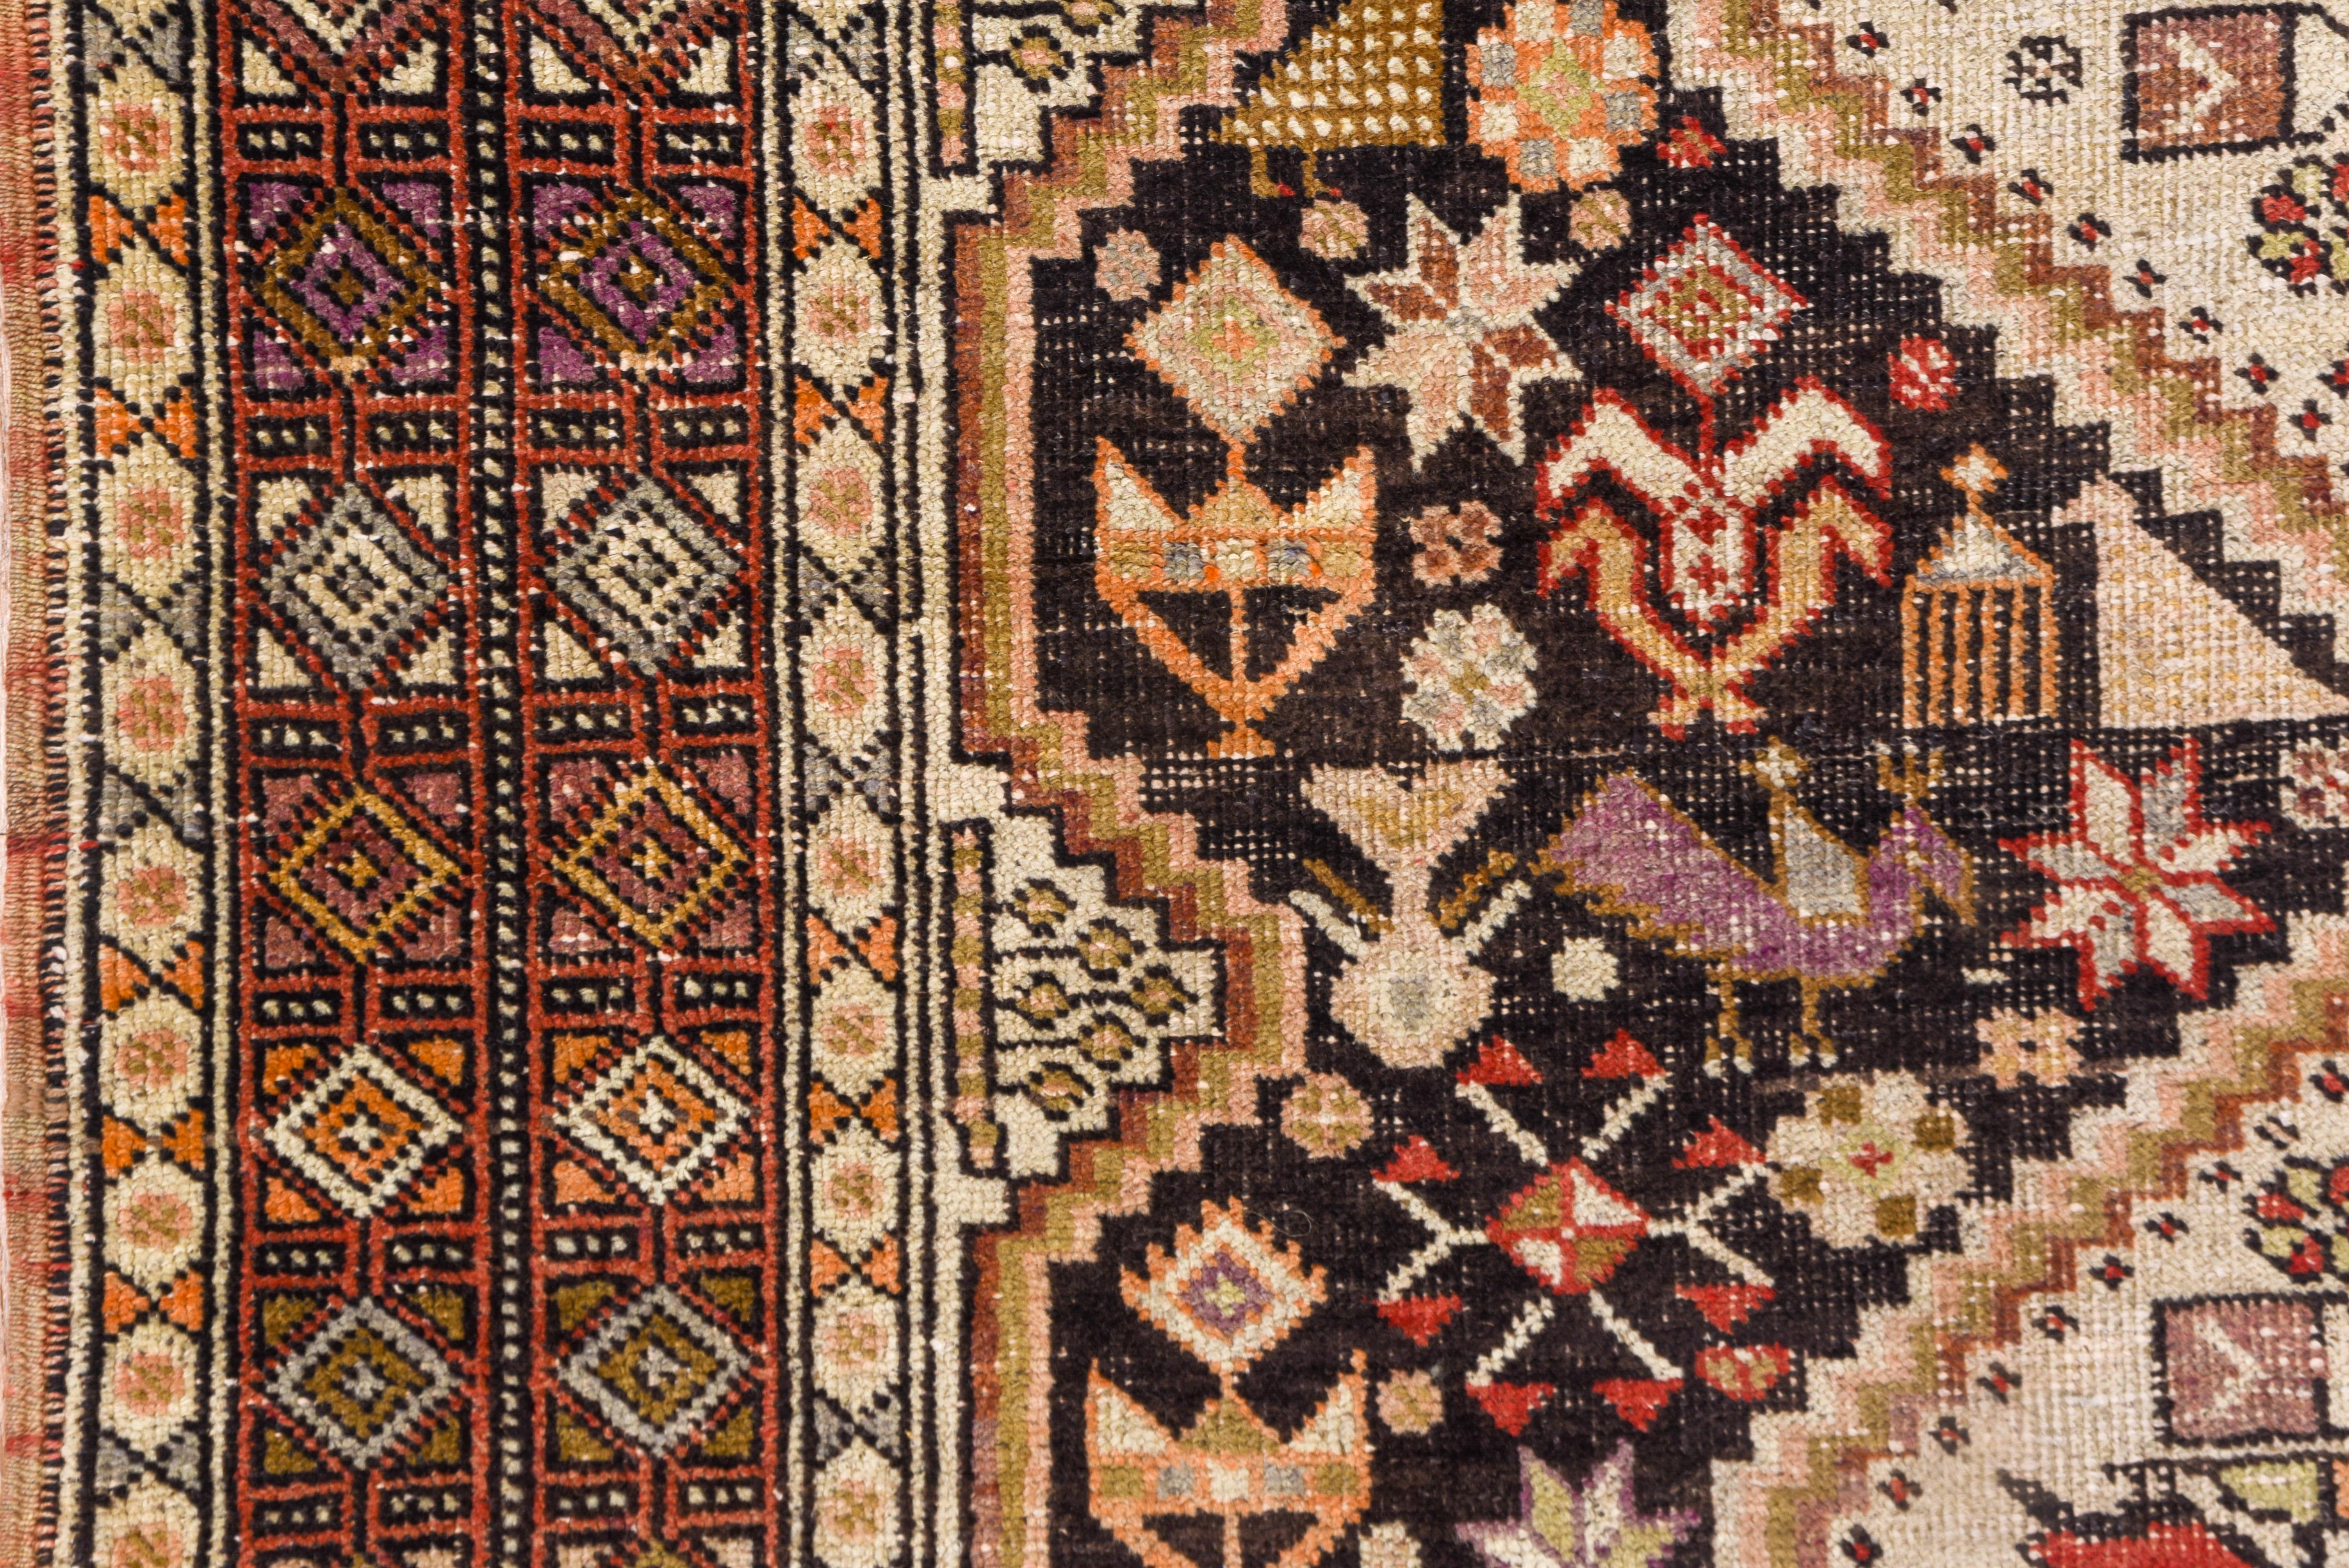 A tribal scatter with a black field with flowers and characteristic chickens, supporting a joined two hexagon ivory pole medallion accented with more small birds. Rose Turkmen-style border of two rows of small squares.